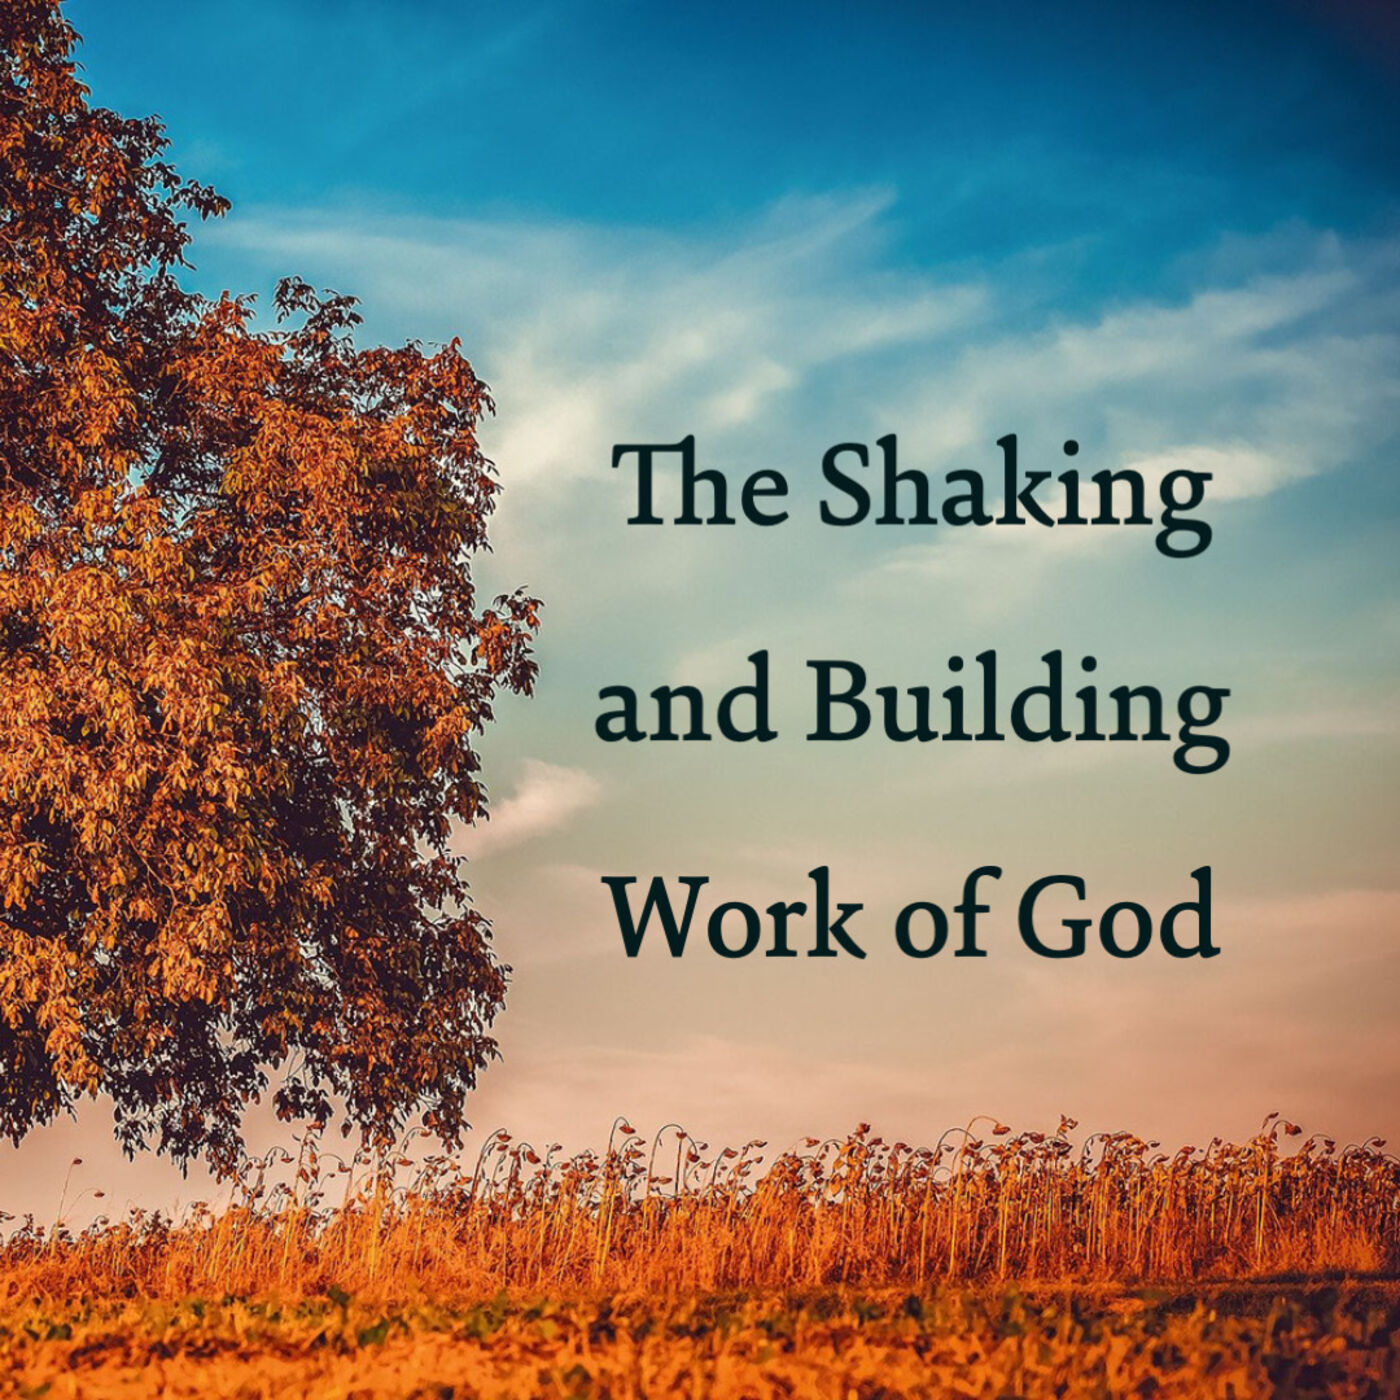 The Shaking and Building Work of God